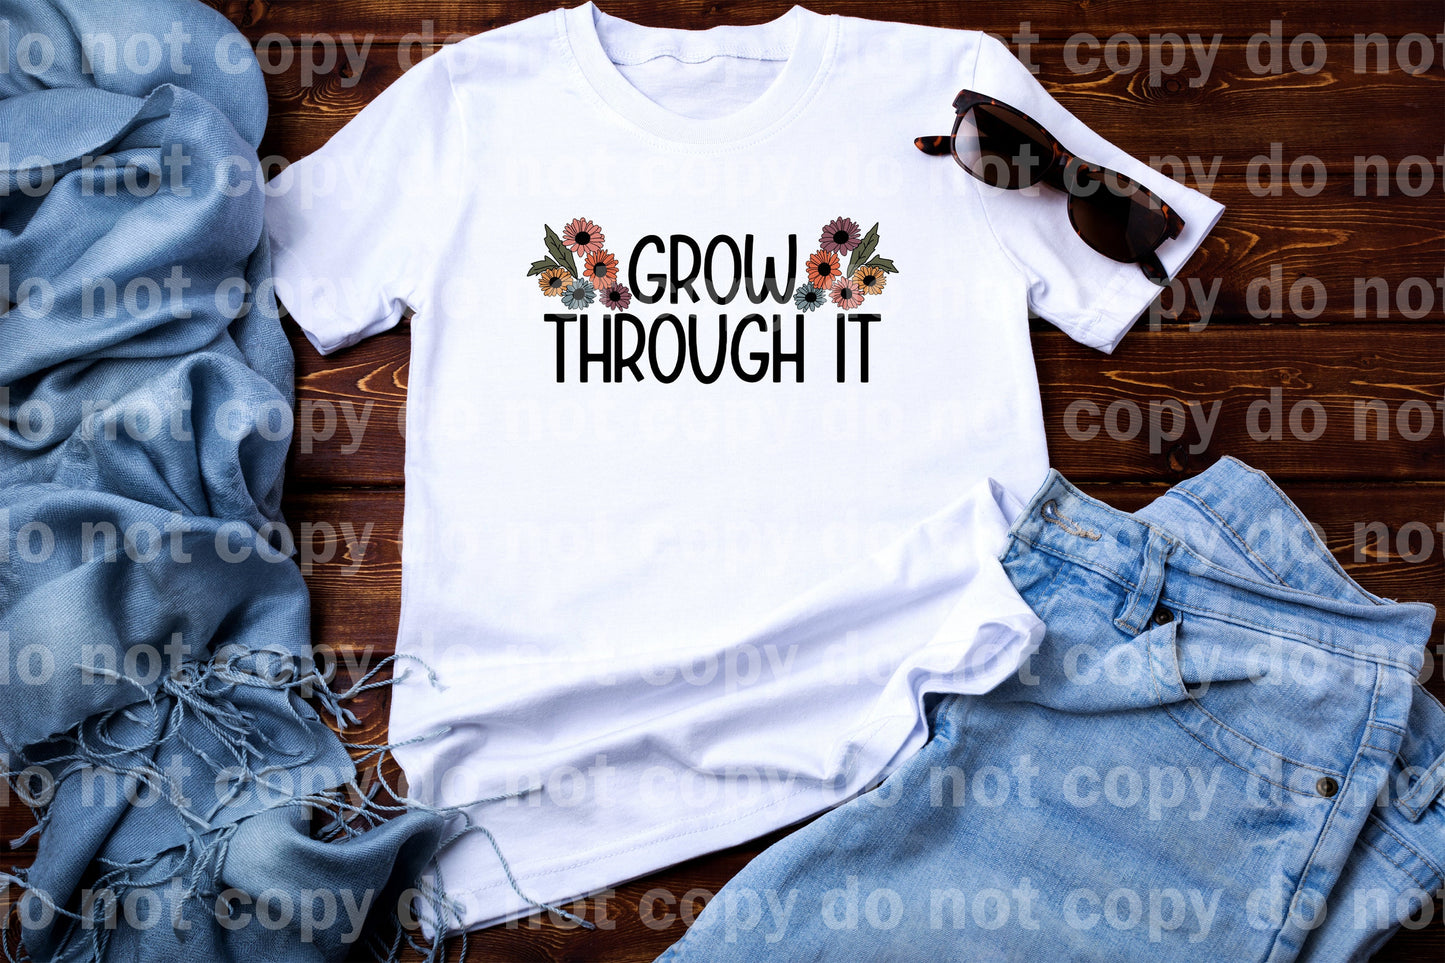 Grow Through It Full Color/One Color Dream Print or Sublimation Print